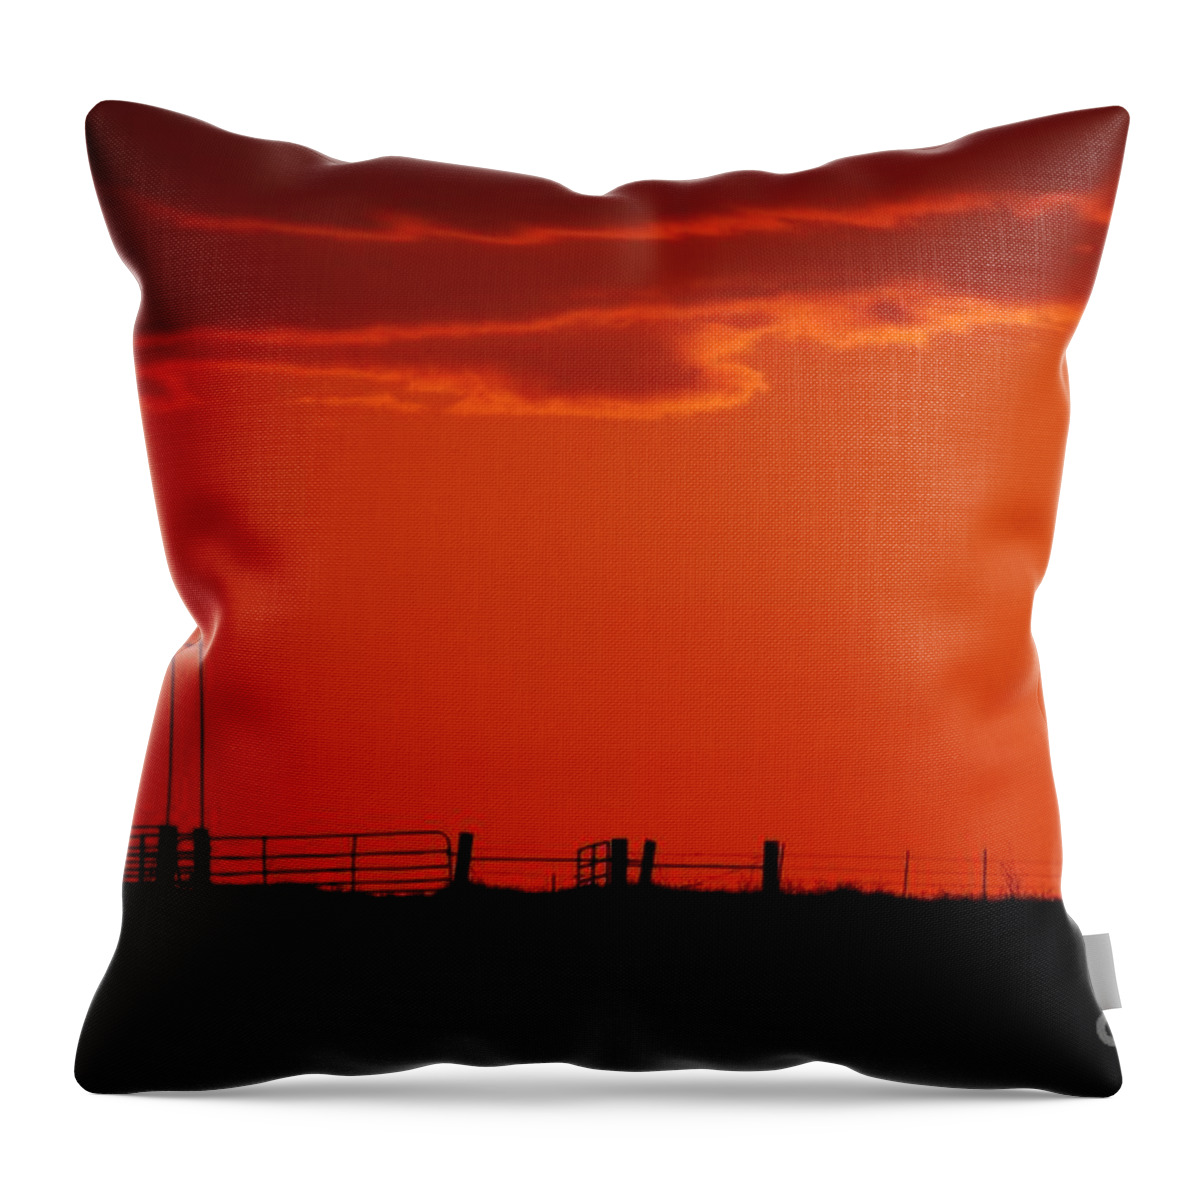 Sunset Throw Pillow featuring the photograph Sunset Corral by J L Zarek